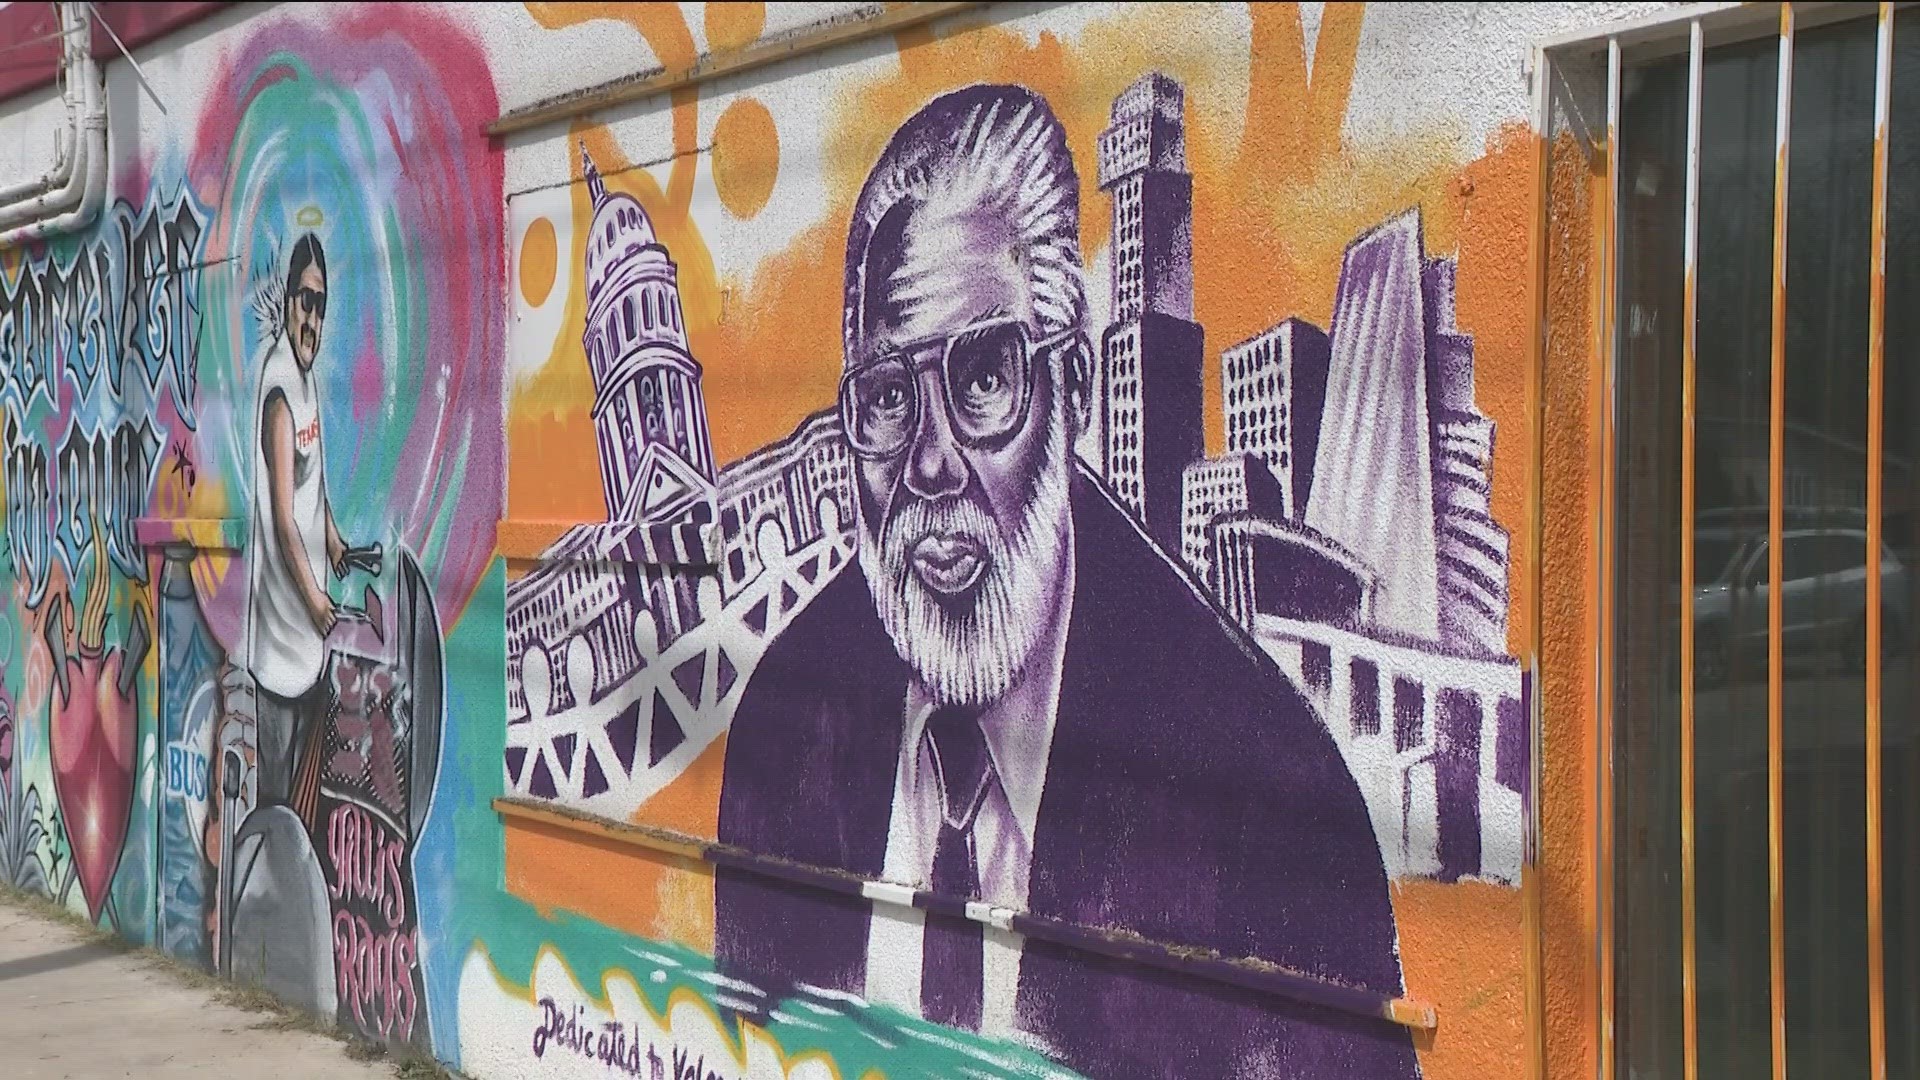 A new mural in South Austin commemorates the life of civil rights activist Volma Overton.